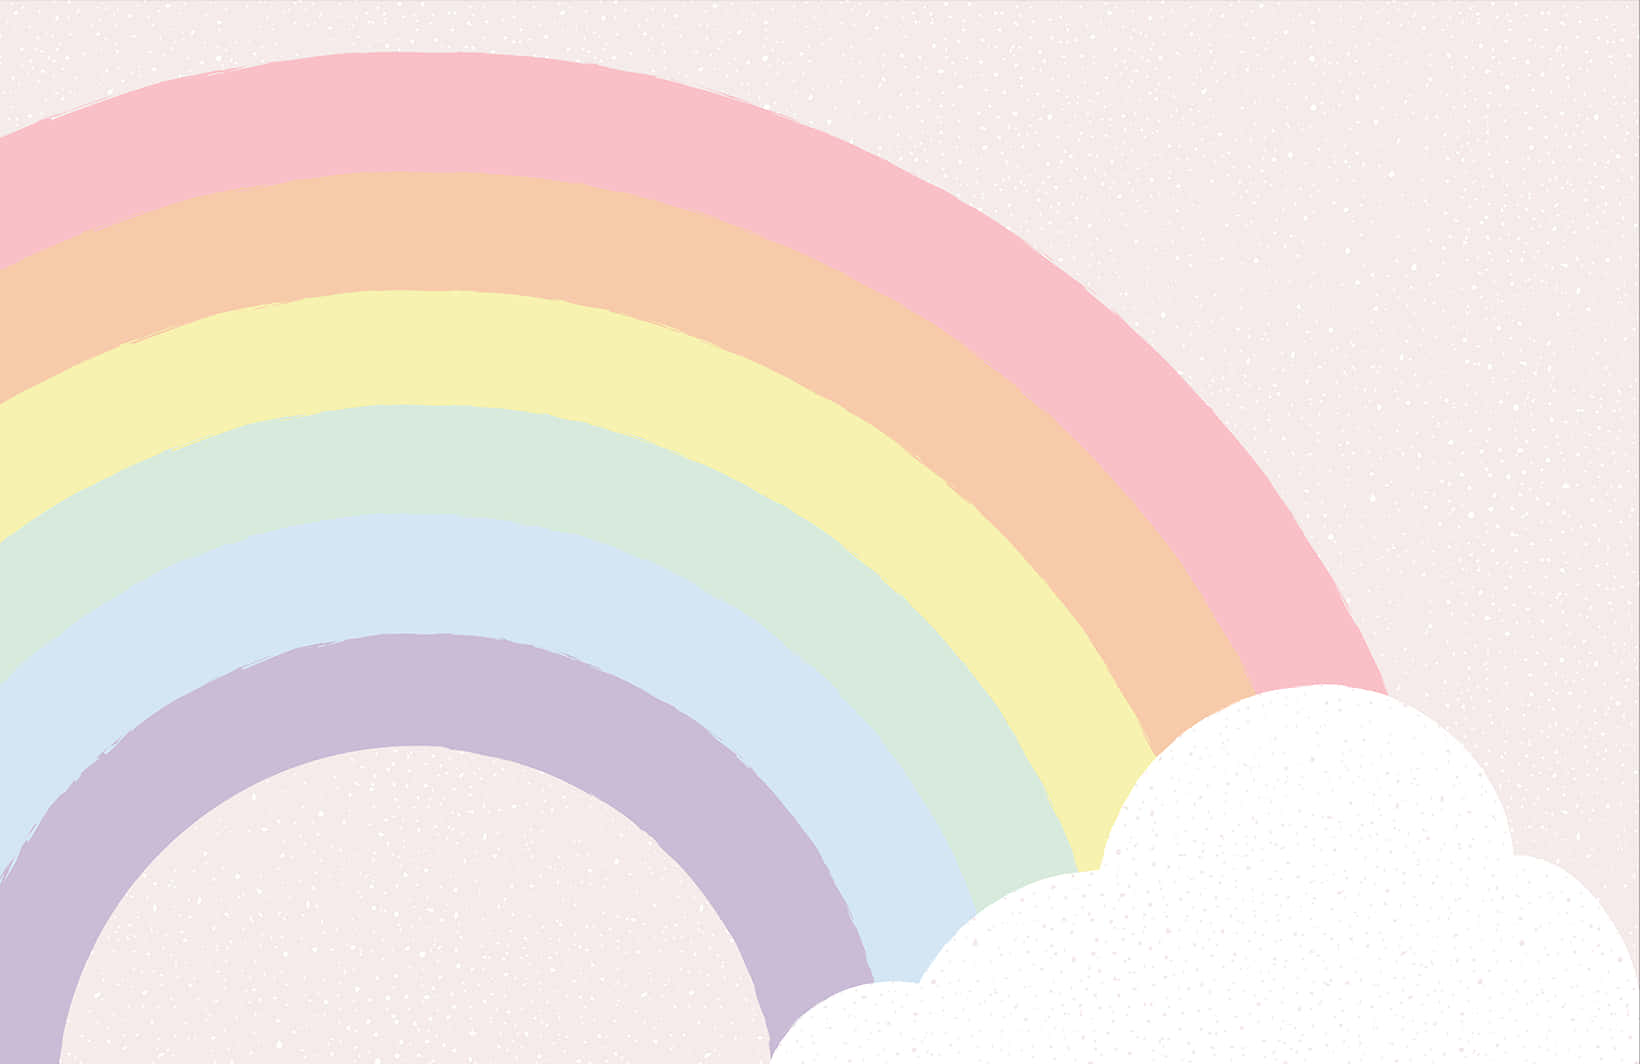 A beautiful pastel rainbow to brighten up your day